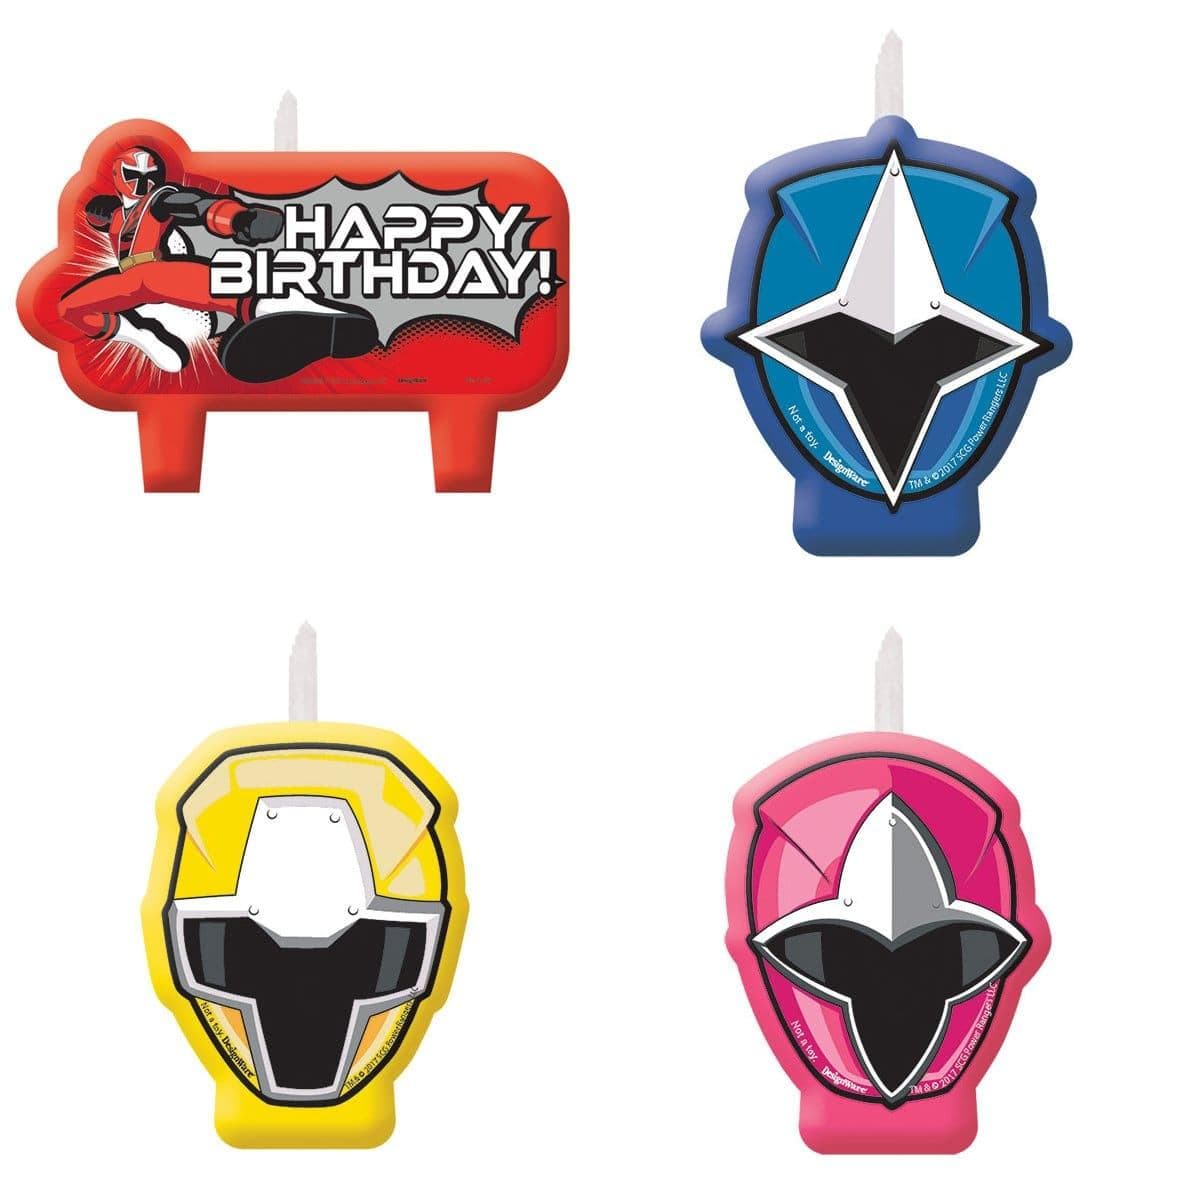 Buy Kids Birthday Power Rangers birthday candles, 4 per package sold at Party Expert